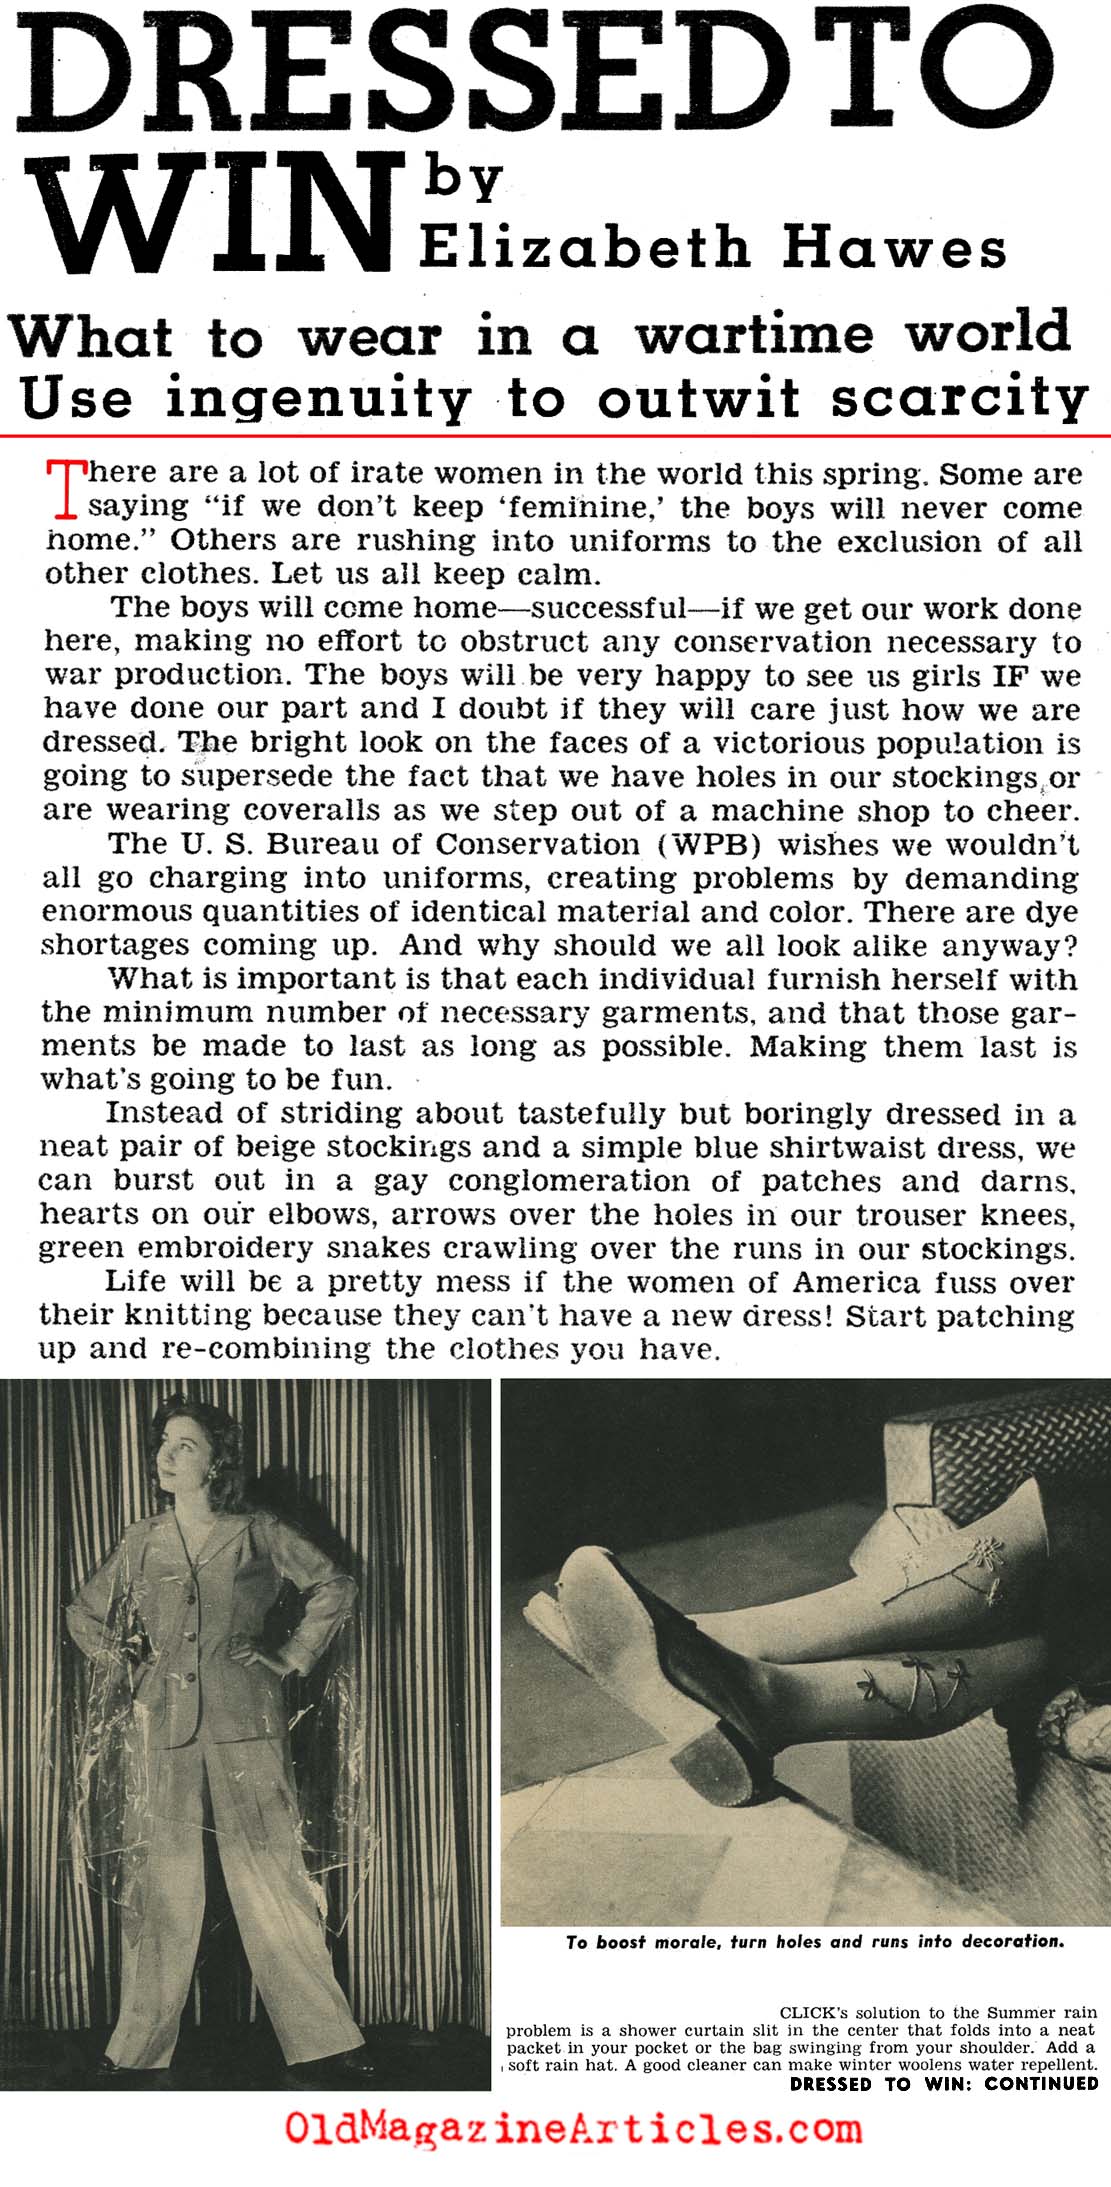 When Ingenuity Out-Witted Scarcity (Click Magazine, 1942)